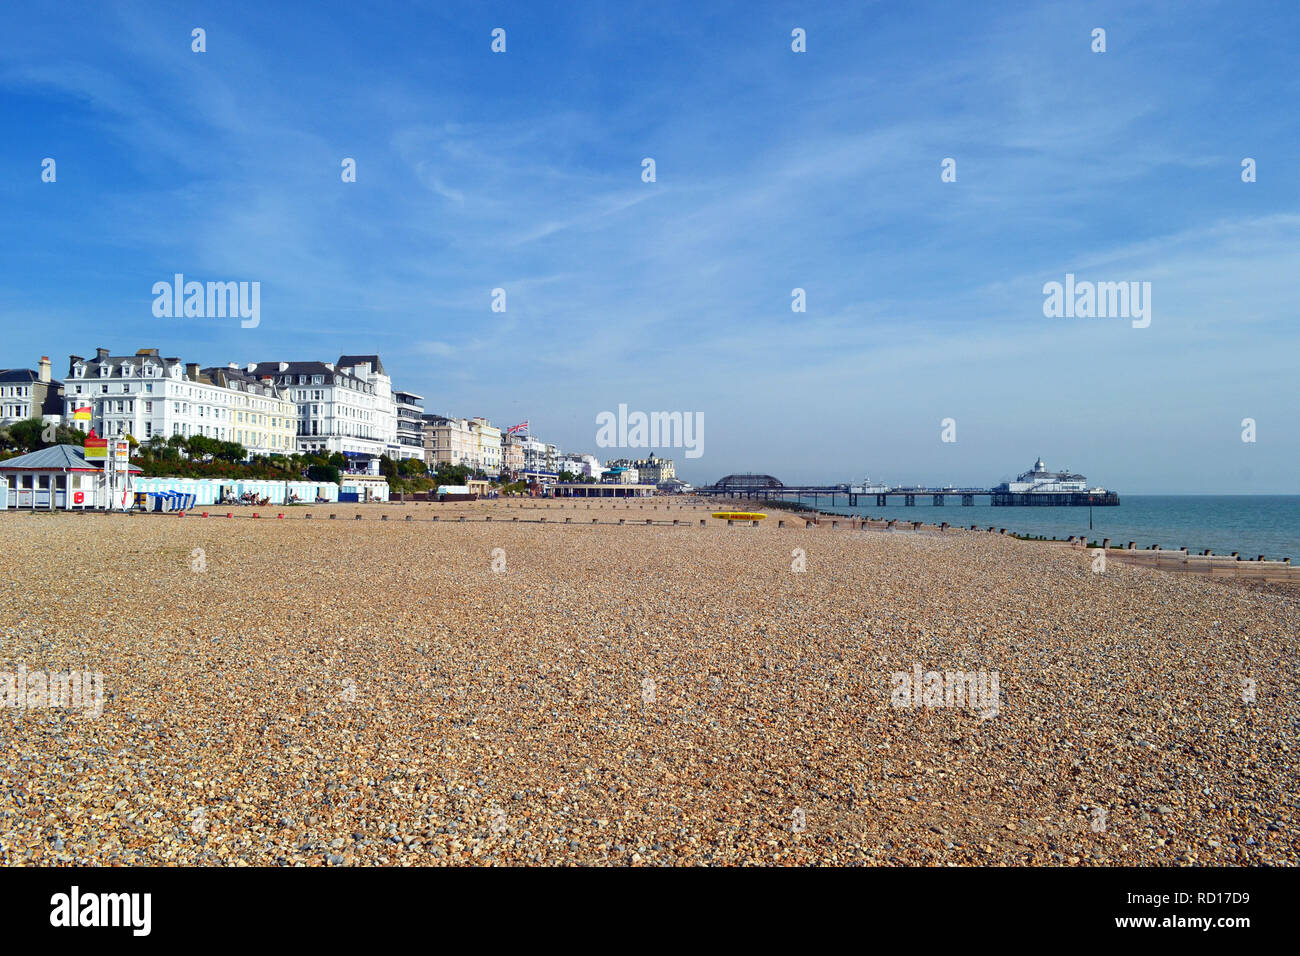 Eastbourne beach, seafront, Eastbourne, East Sussex, UK Stock Photo